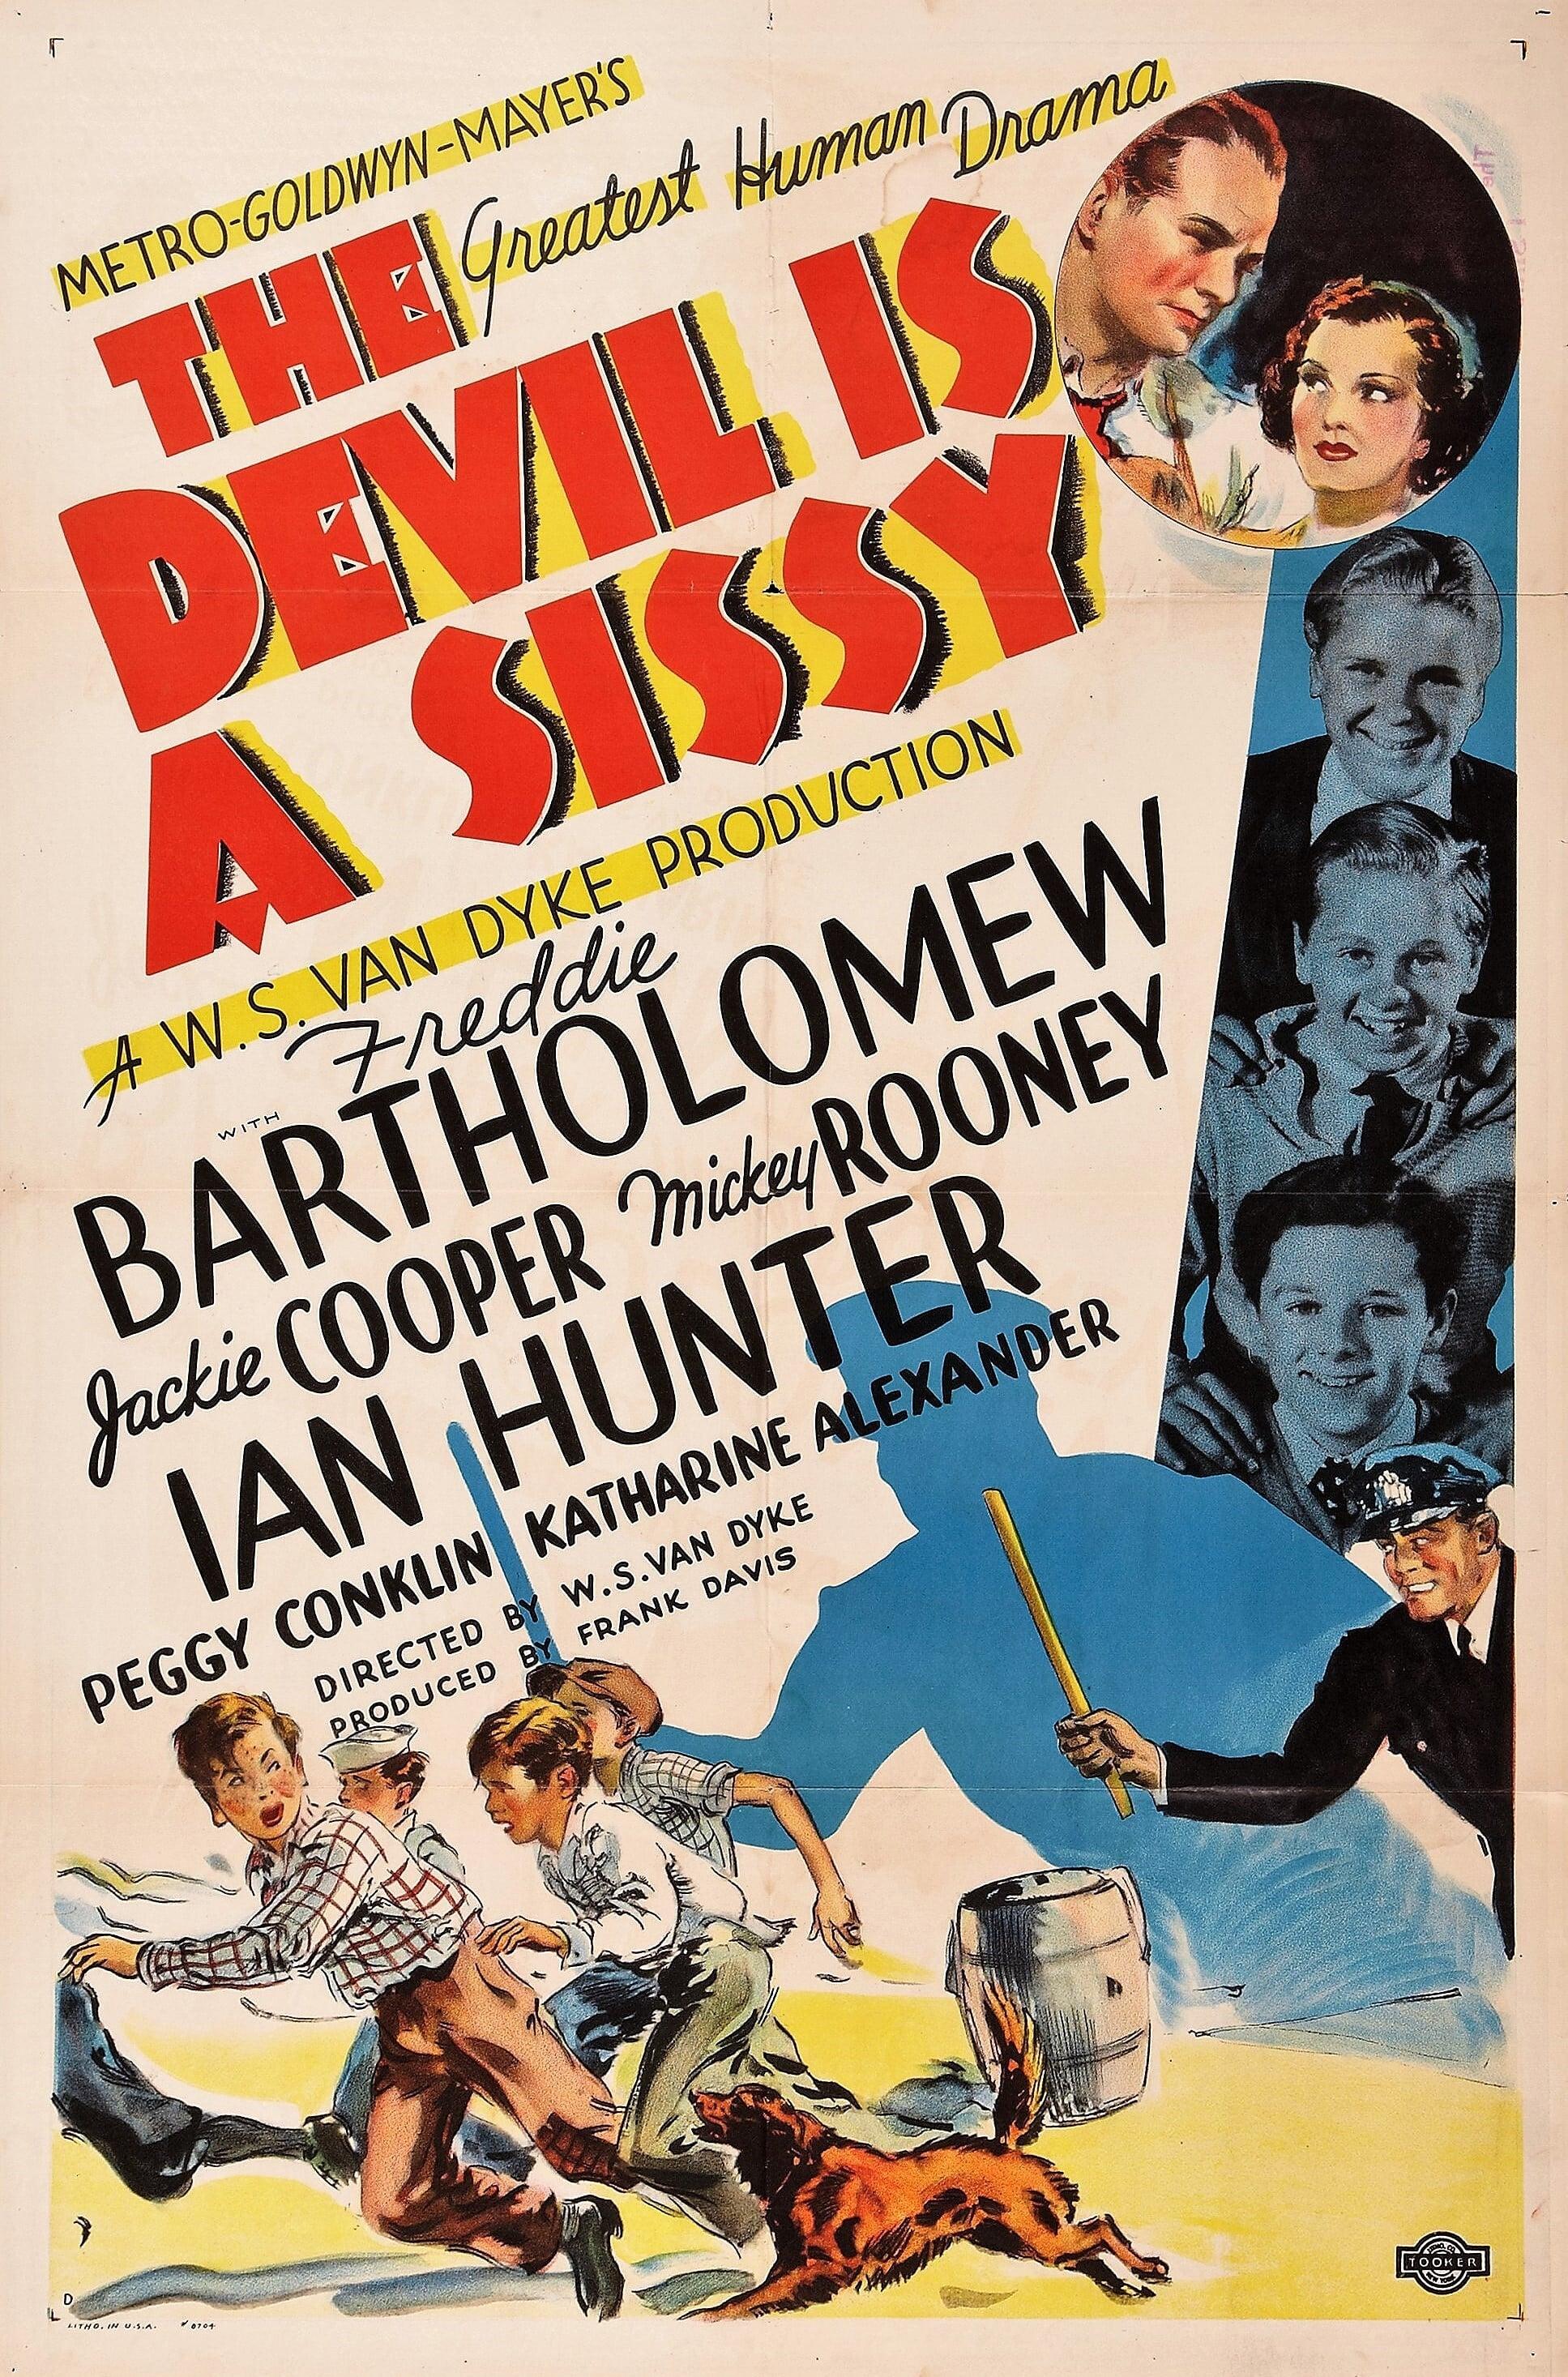 The Devil Is a Sissy poster